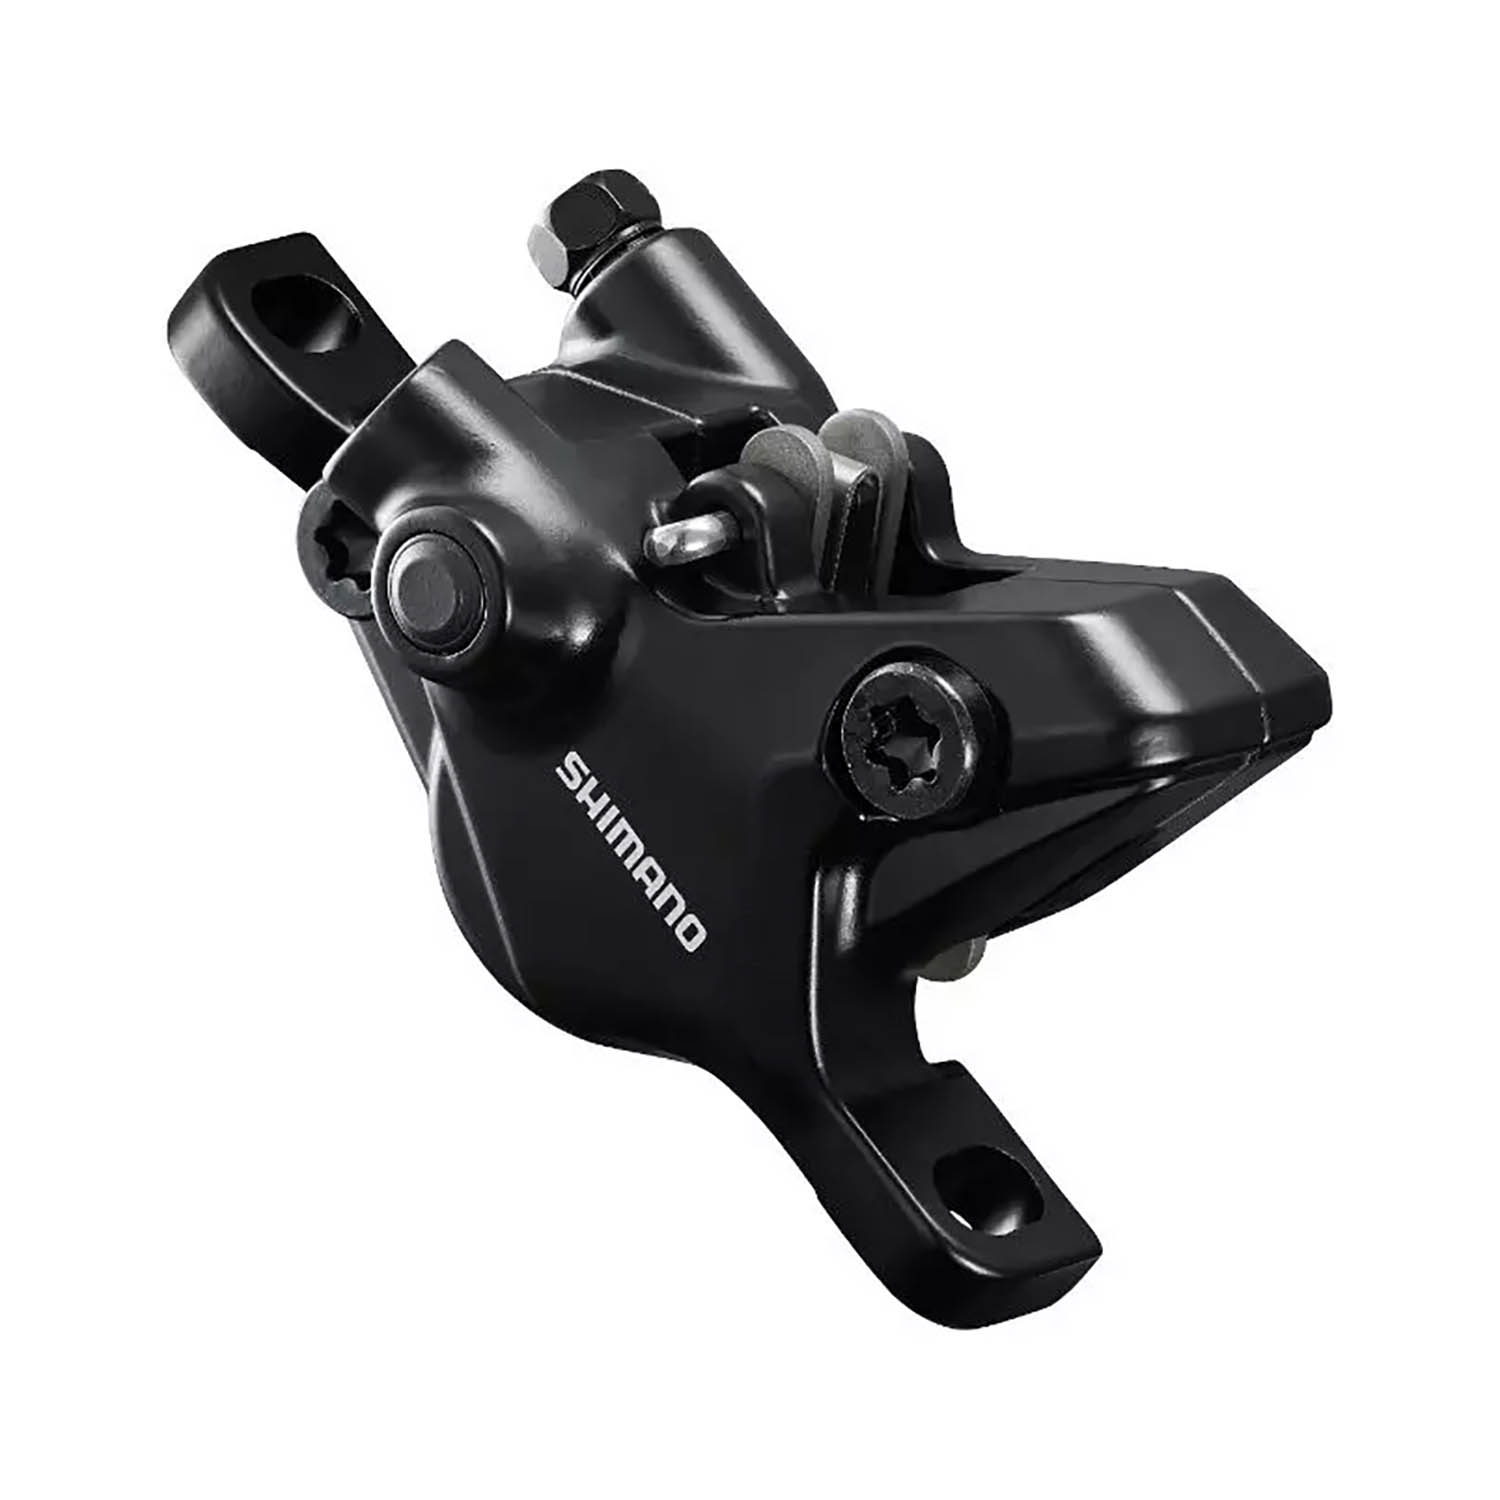 Shimano remklauw BR-MT410 (Deore)